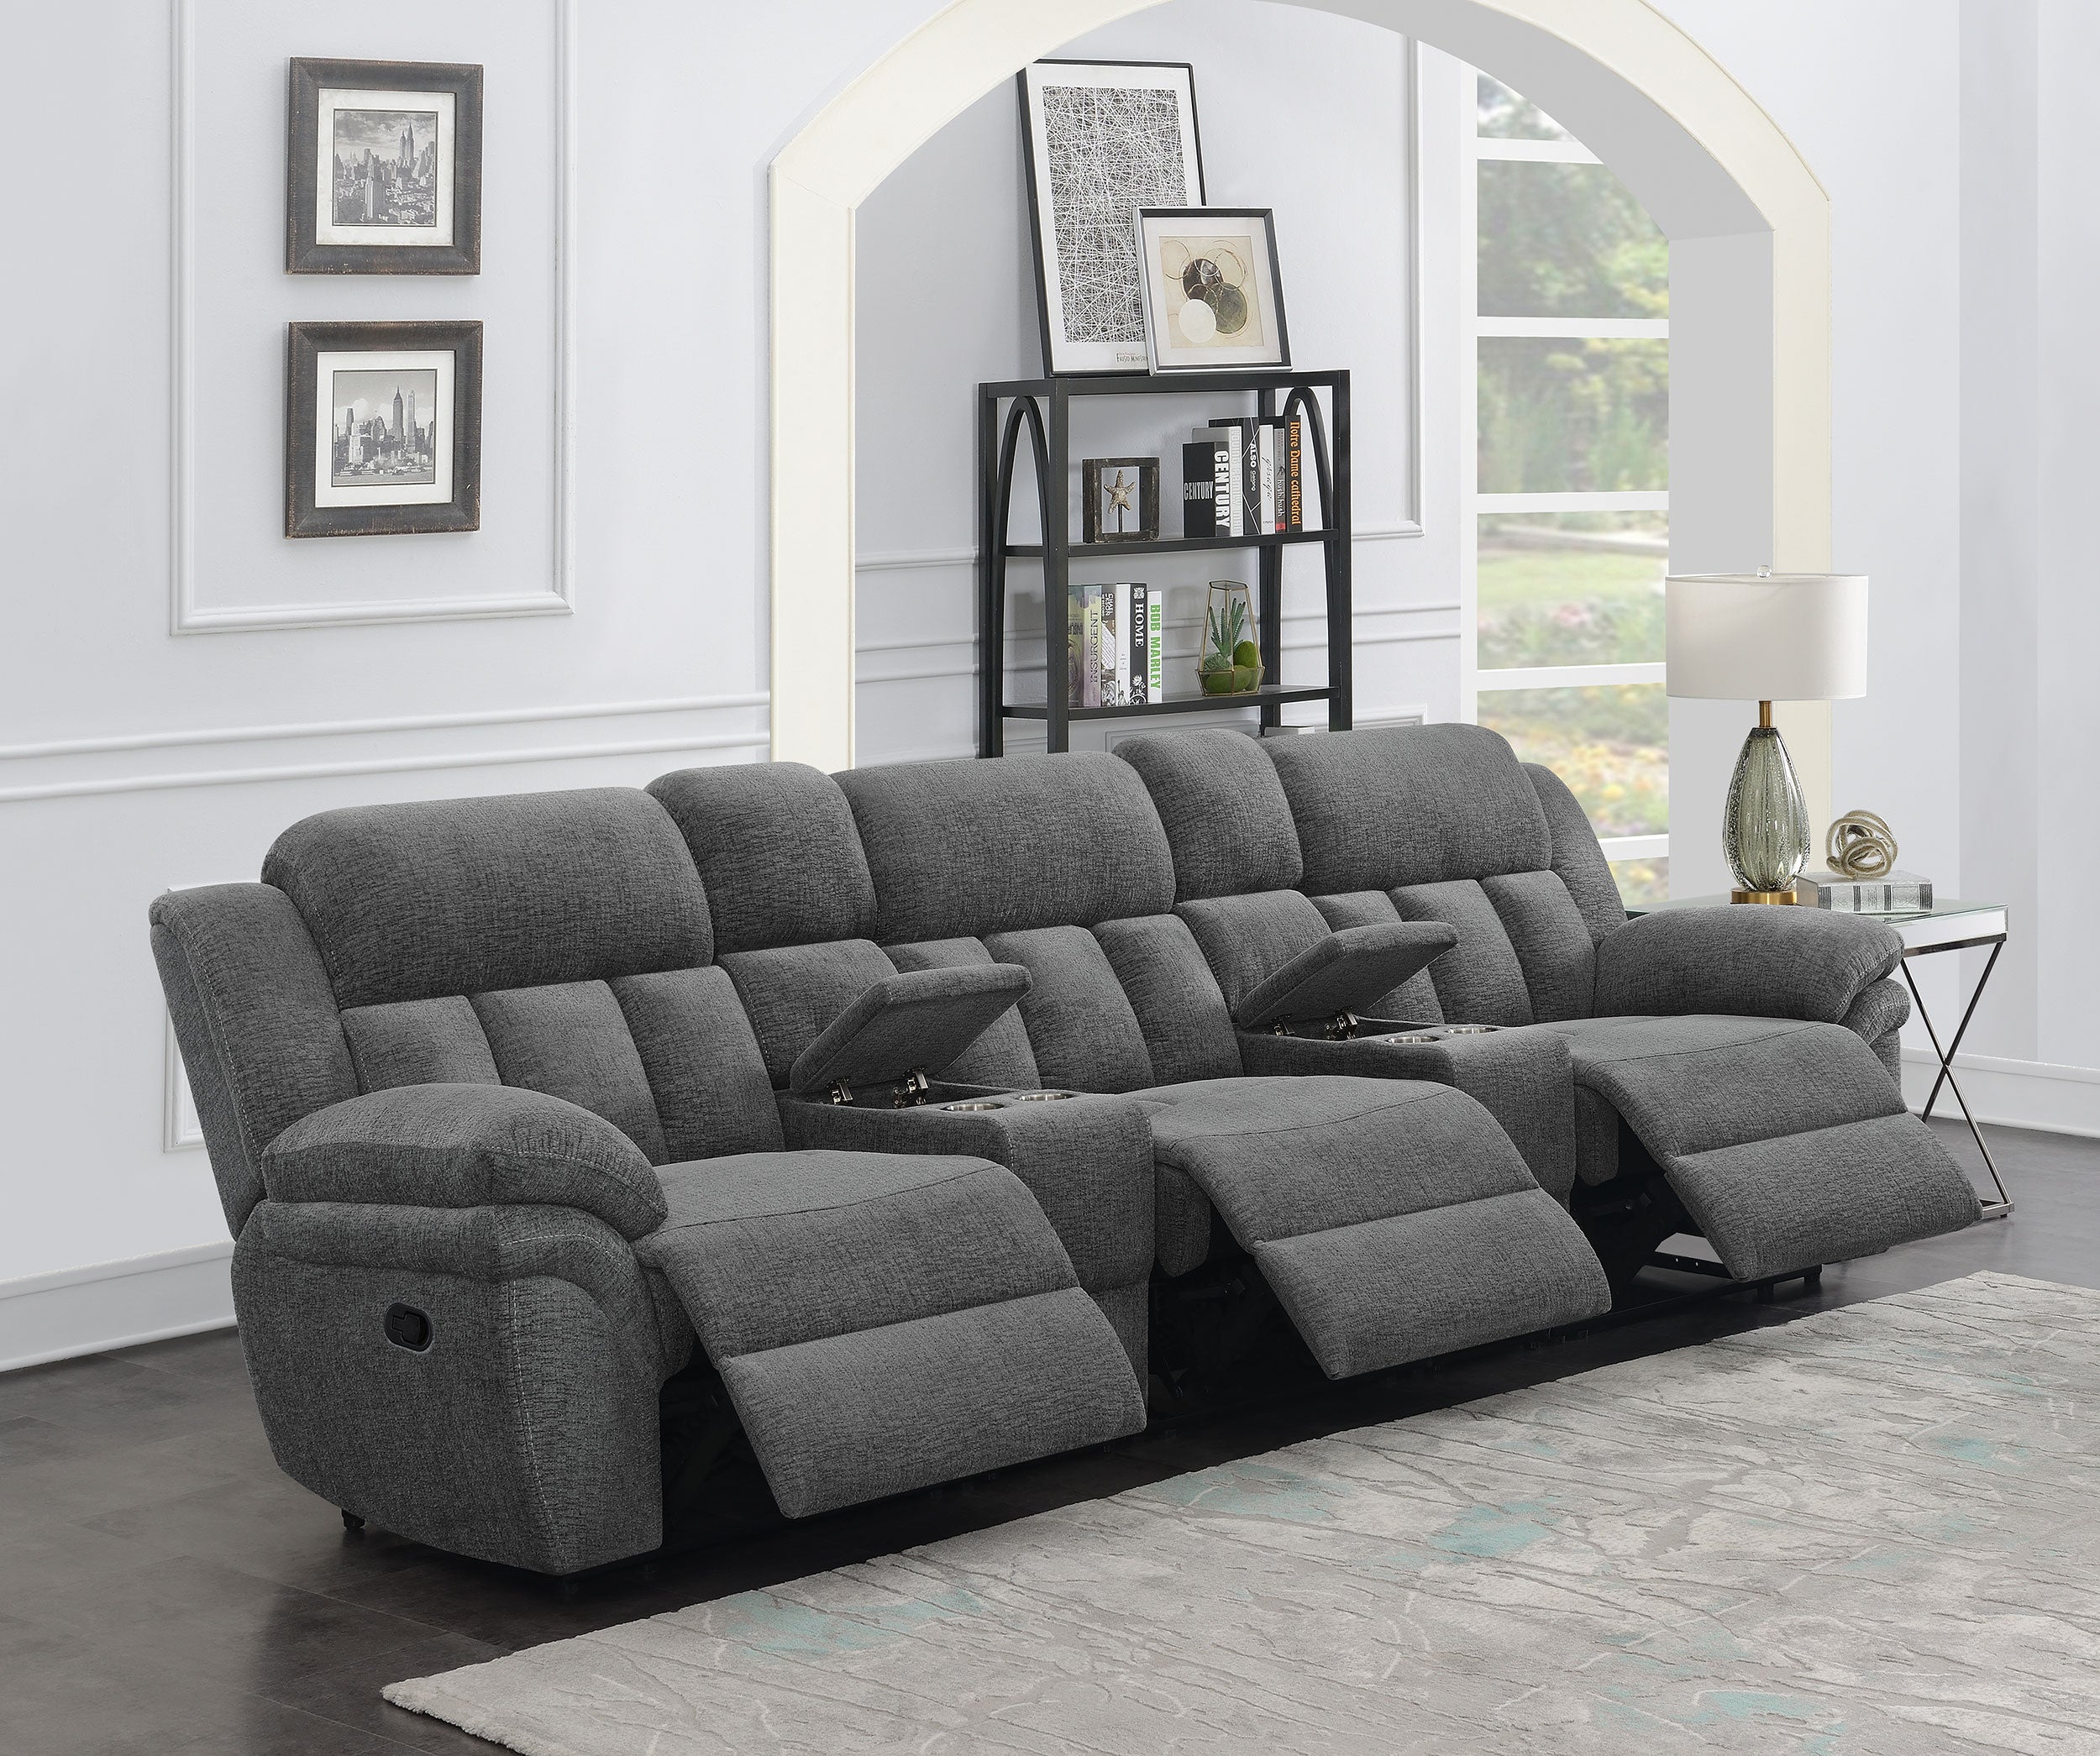 Coaster Bahrain Upholstered Home Theater Seating Charcoal Default Title